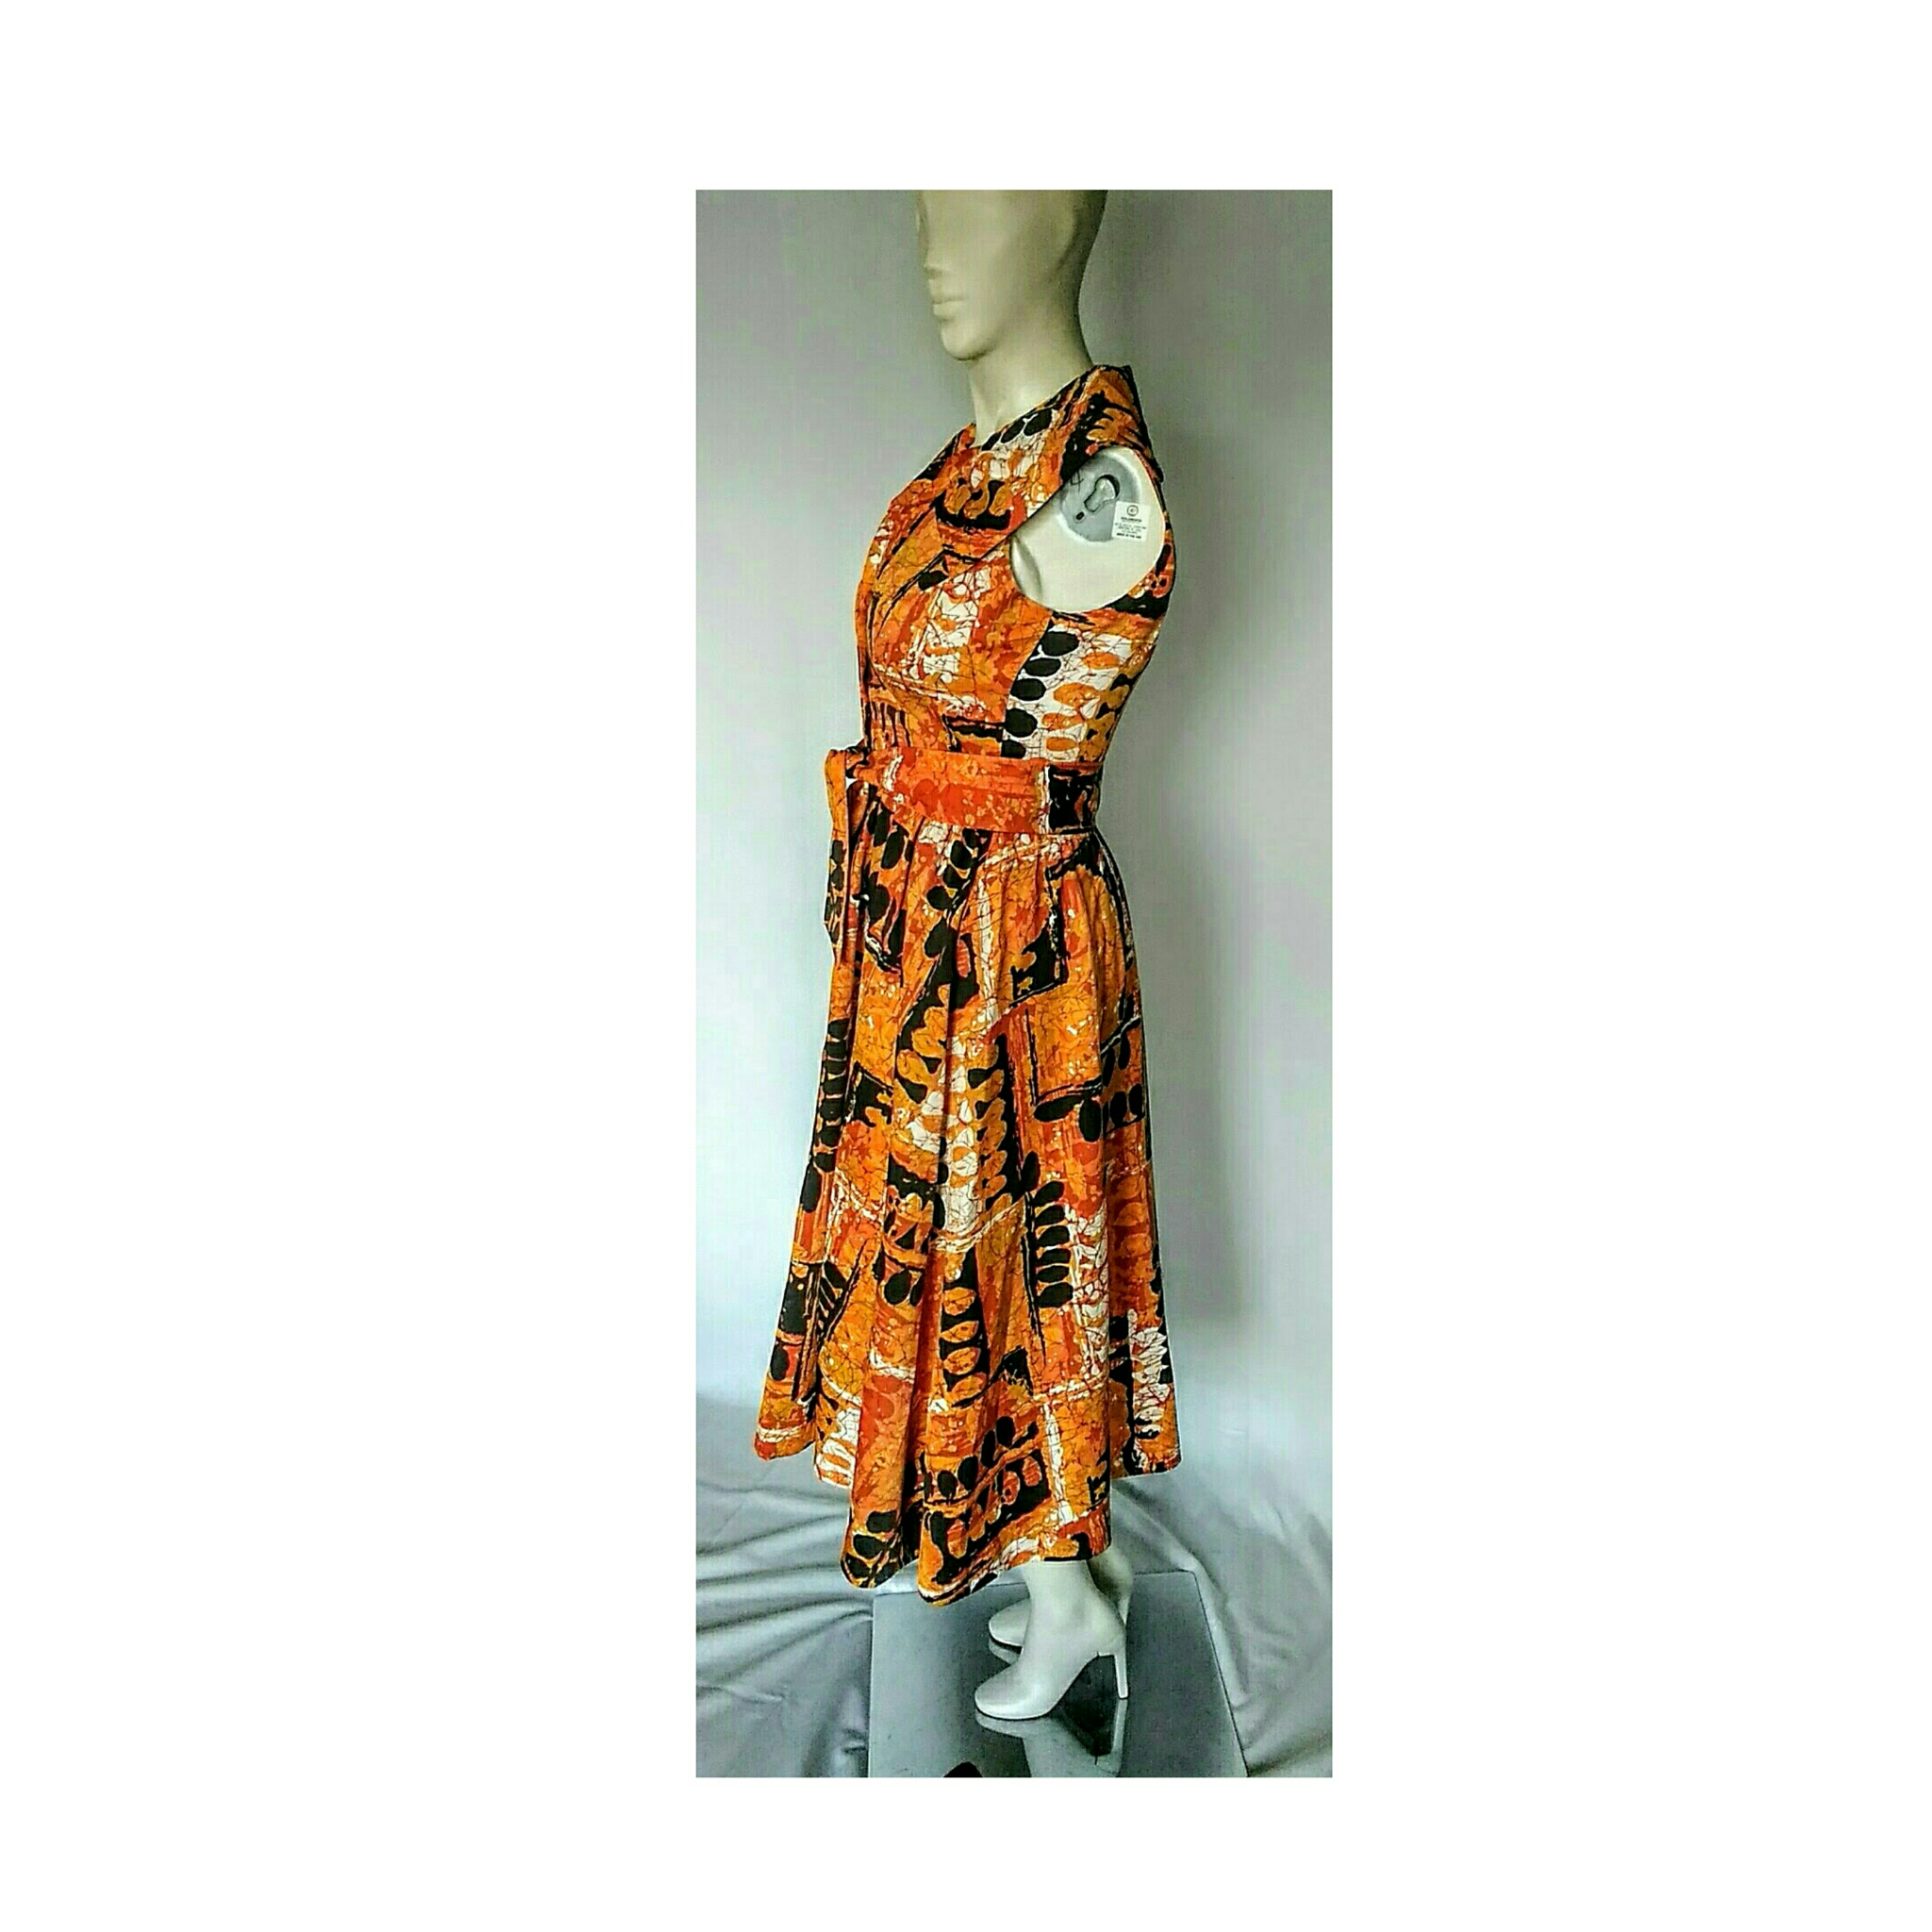 Vintage 1970's Hilo Hattie Abstract Dress; Design by Evelyn Margolis